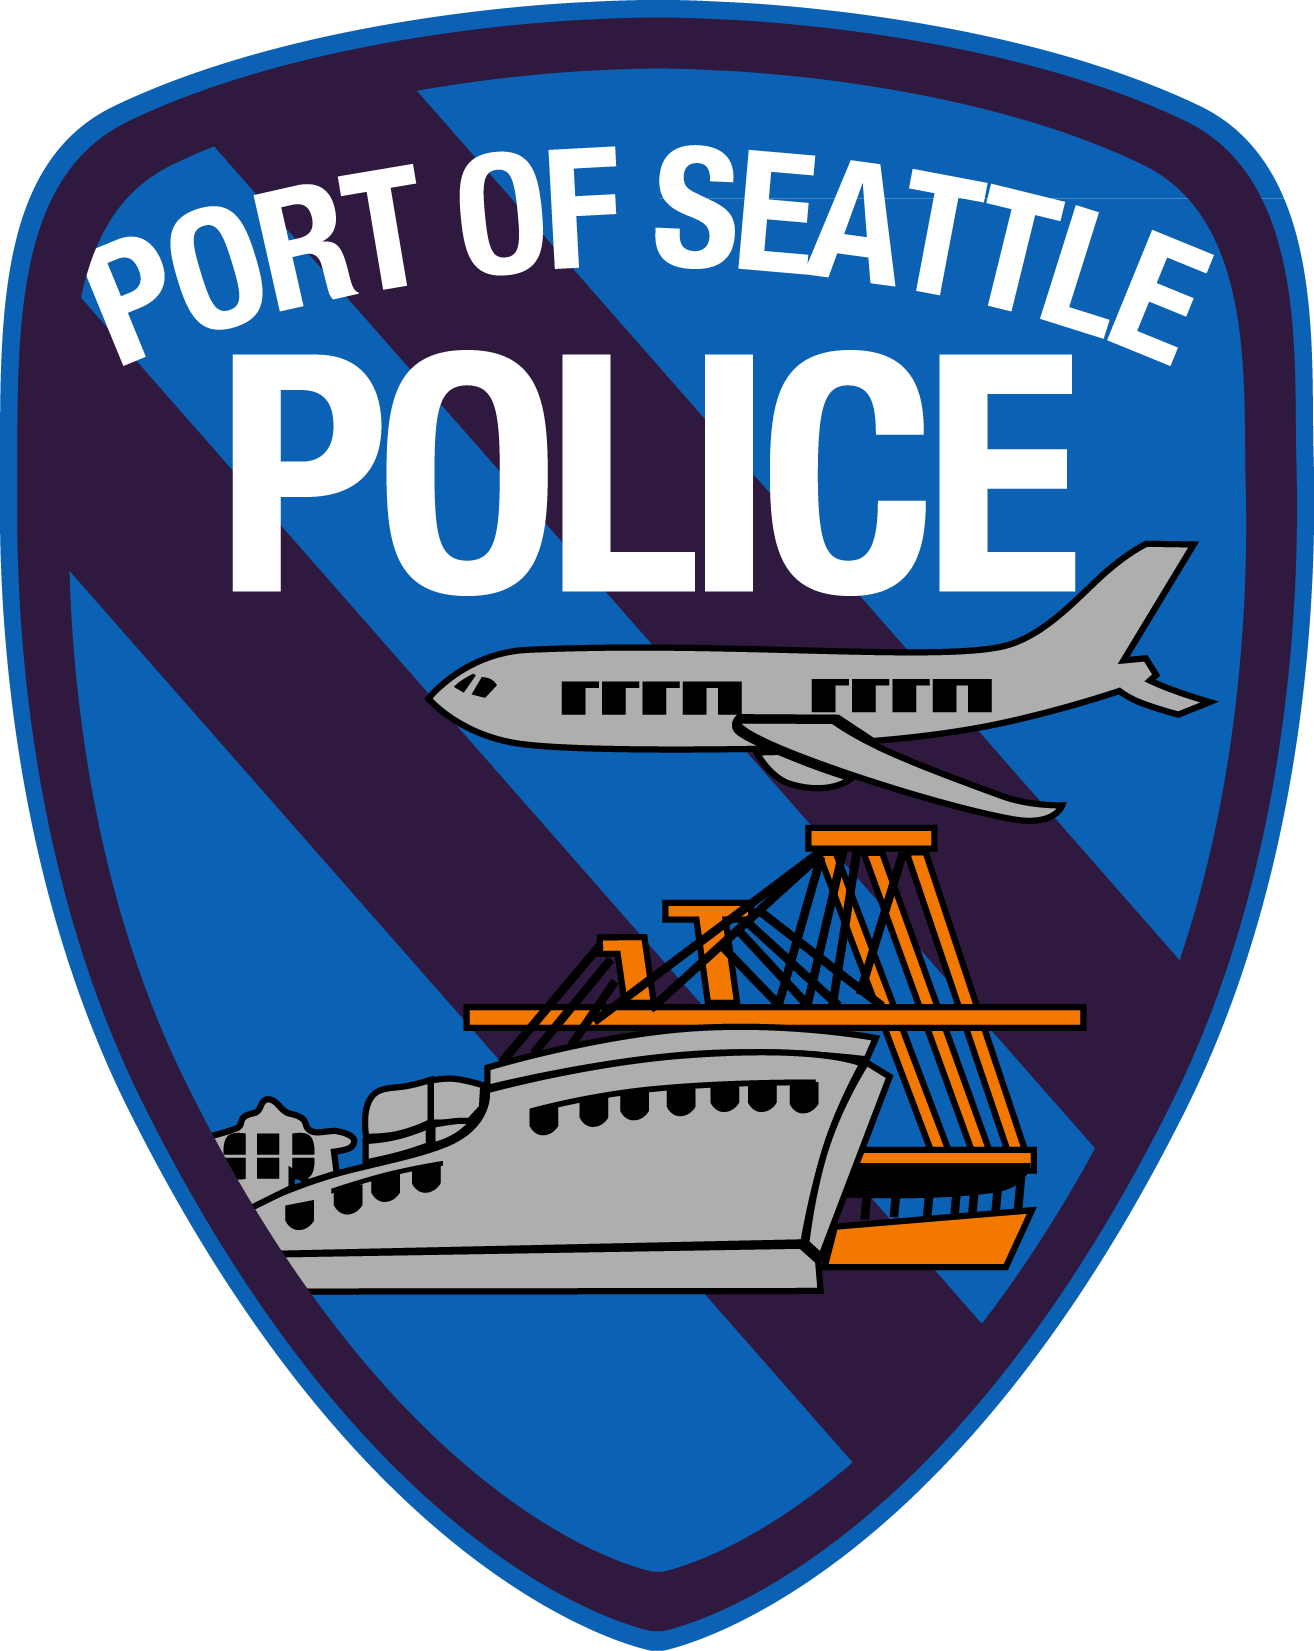 Port of Seattle Police Department provides testionimal after six years of using eSOPH